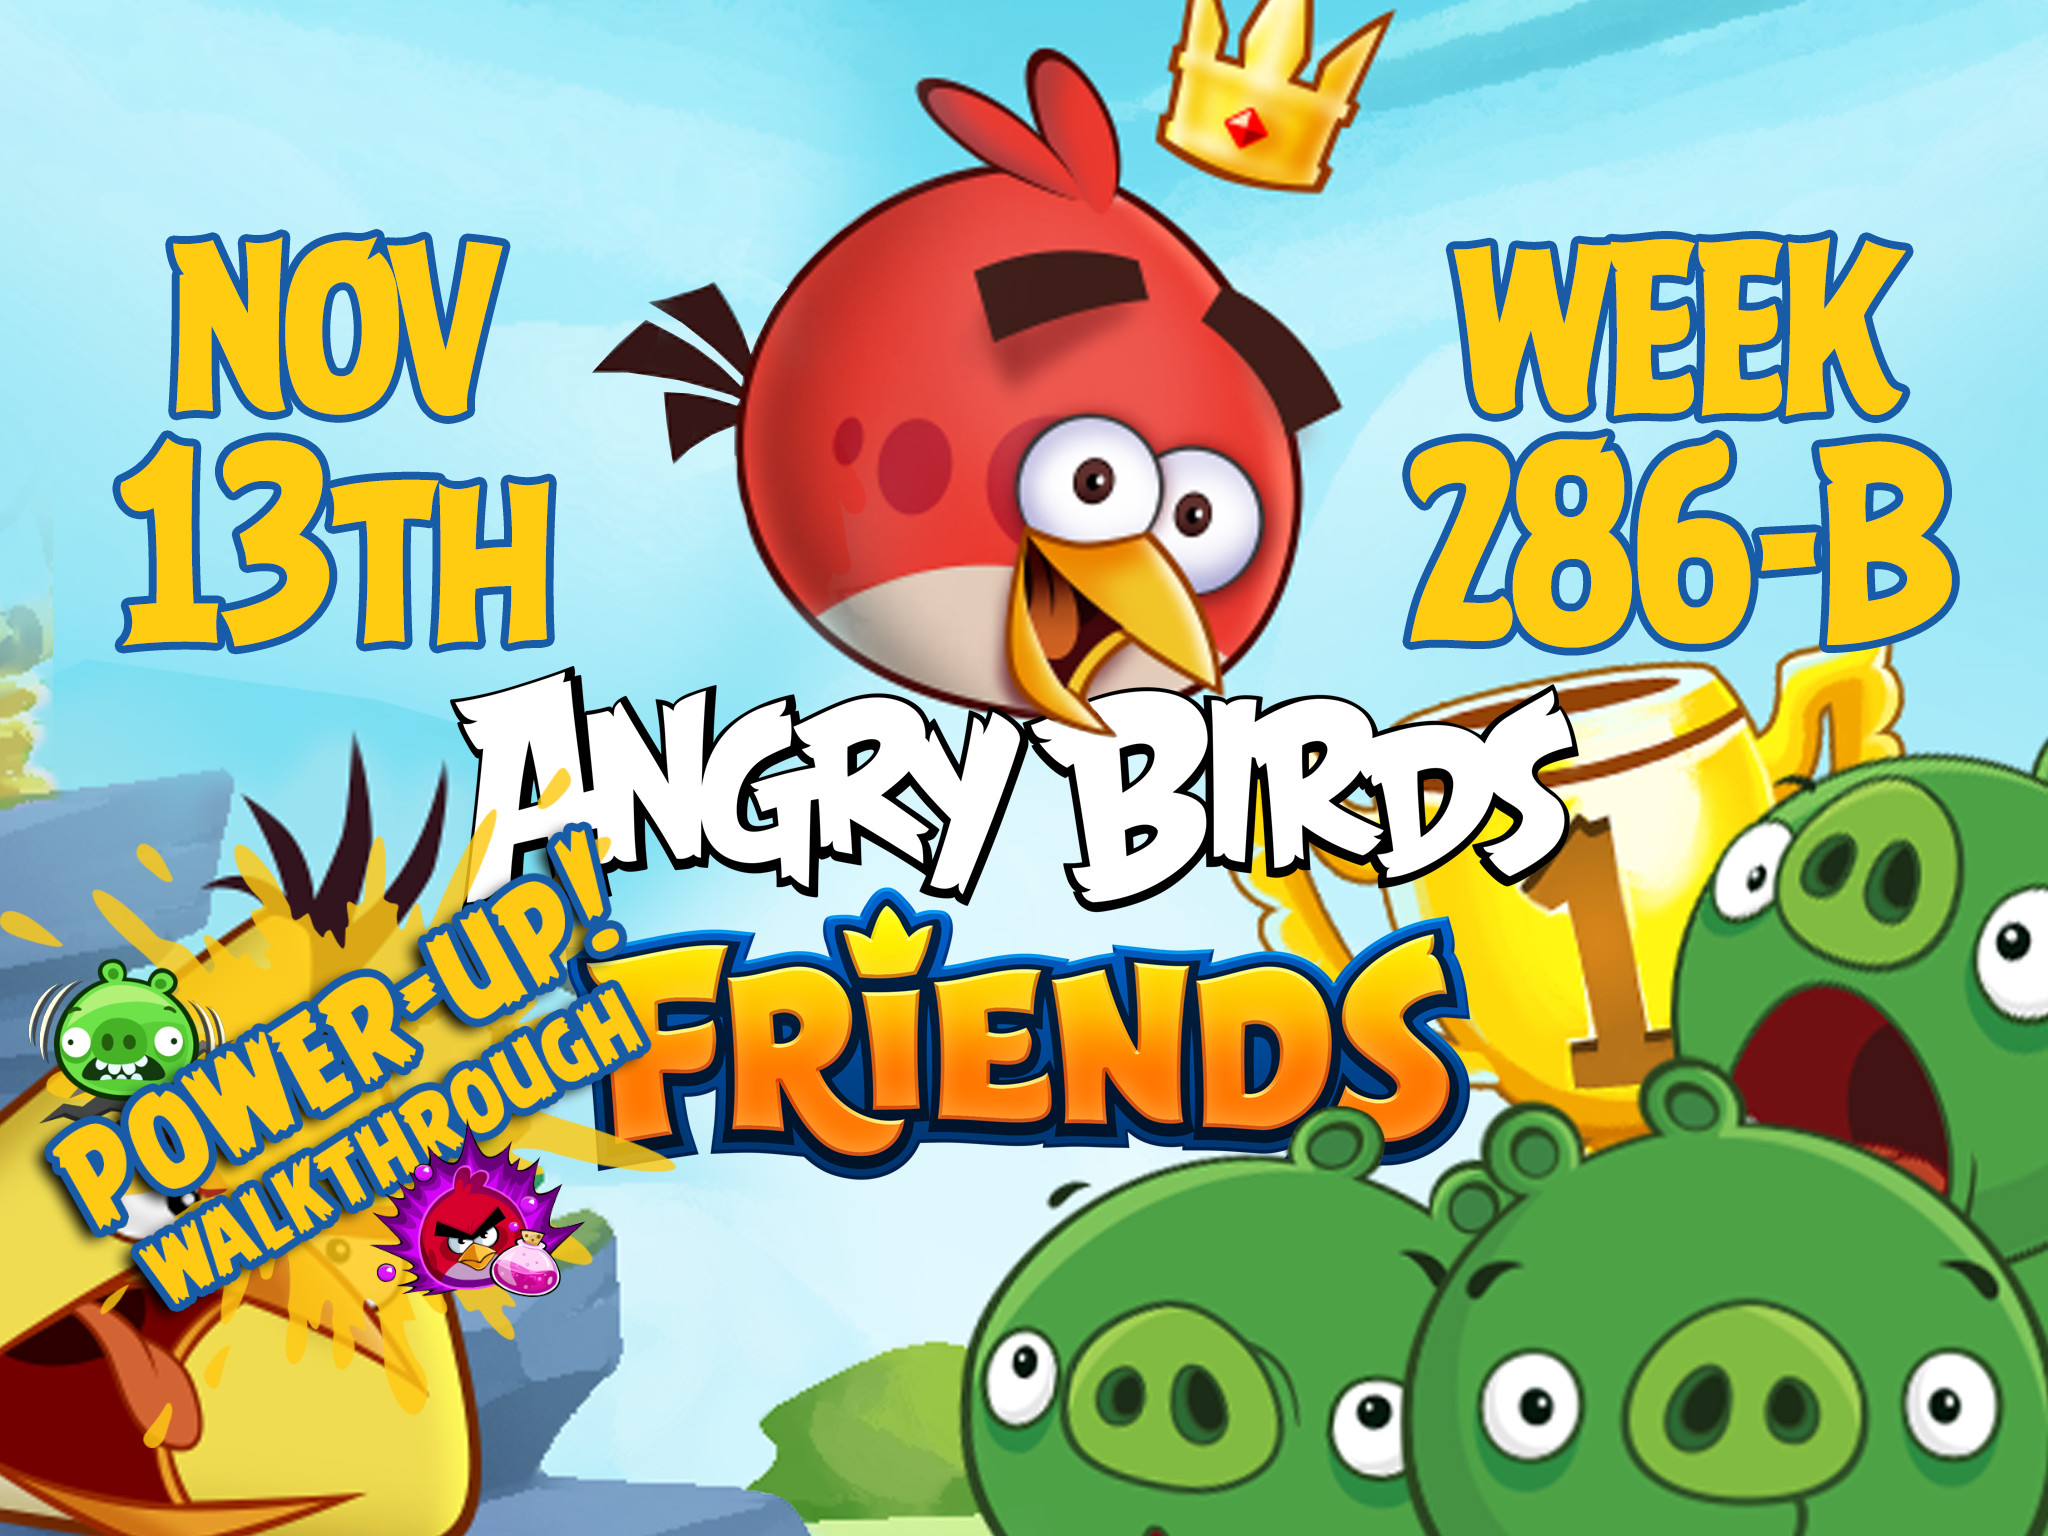 Angry Birds Friends Tournament Week 286-B Feature Image PU